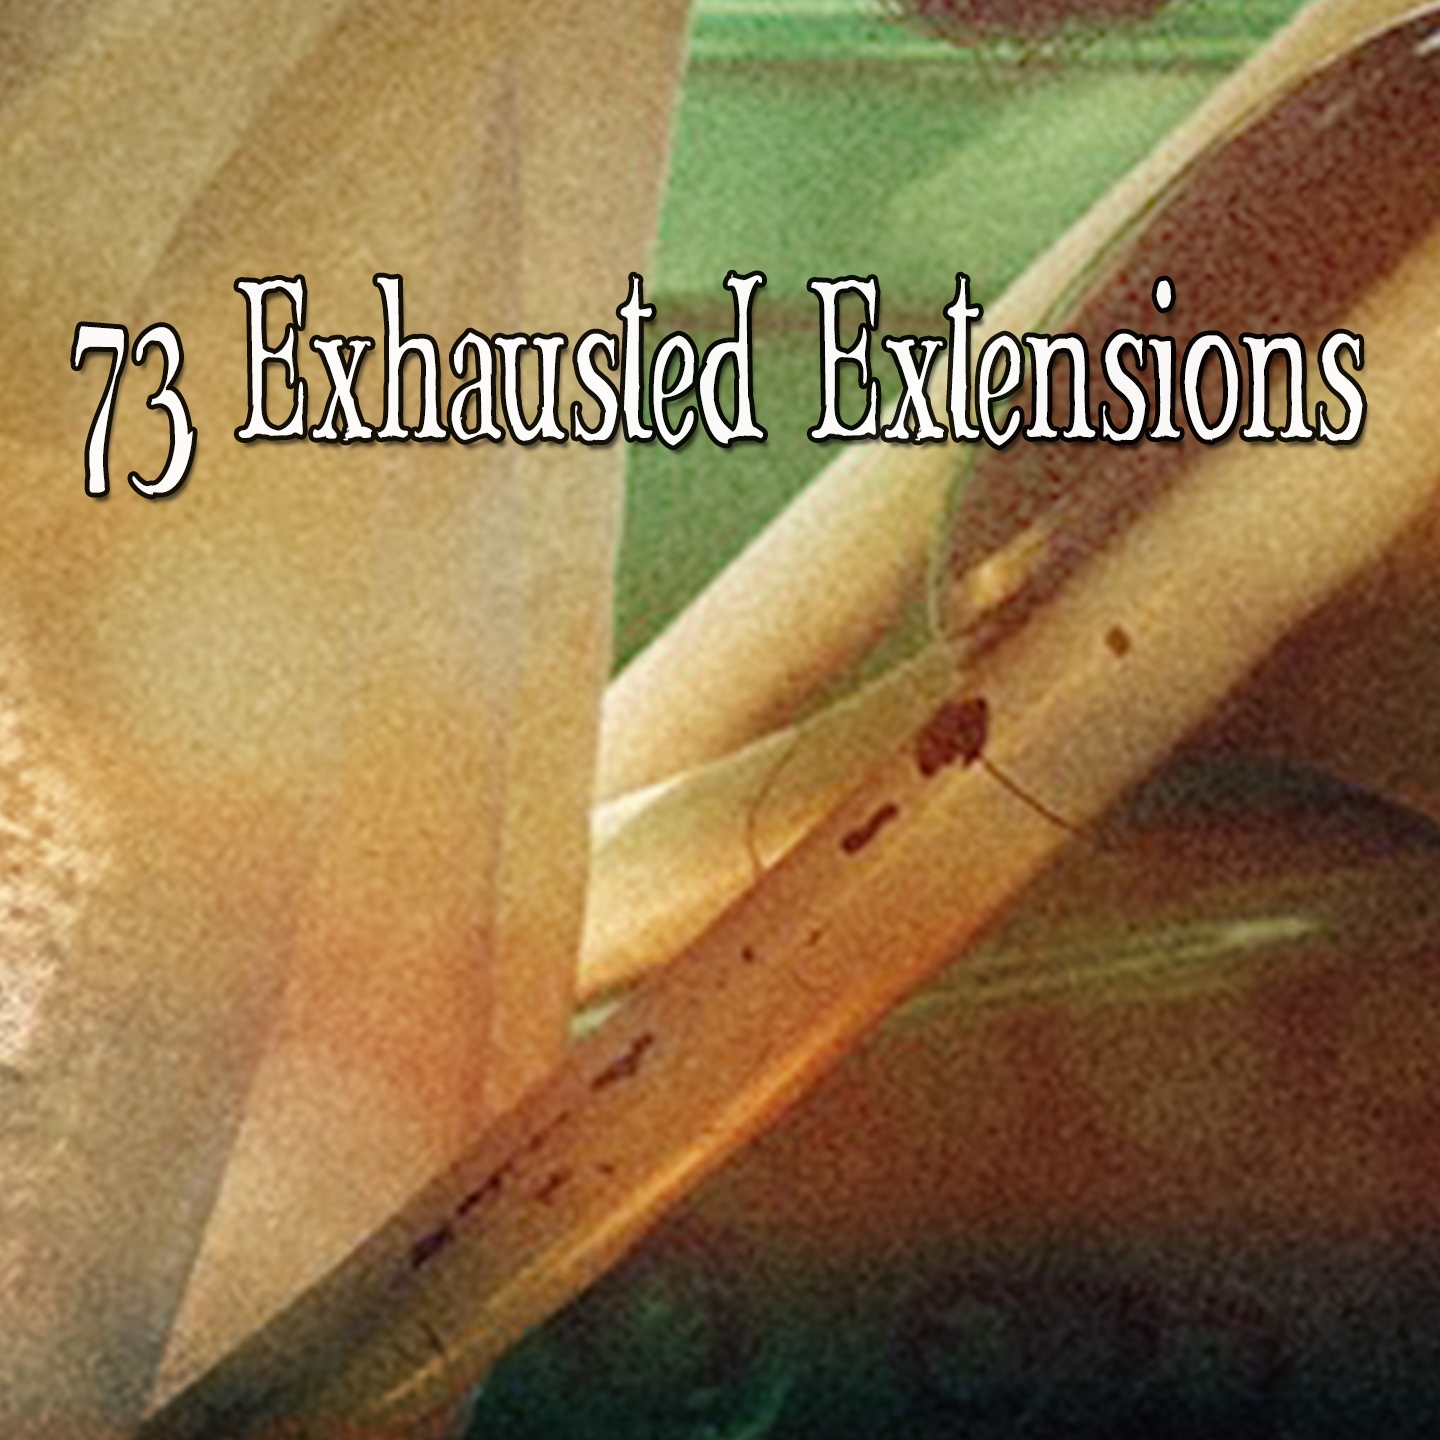 73 Exhausted Extensions